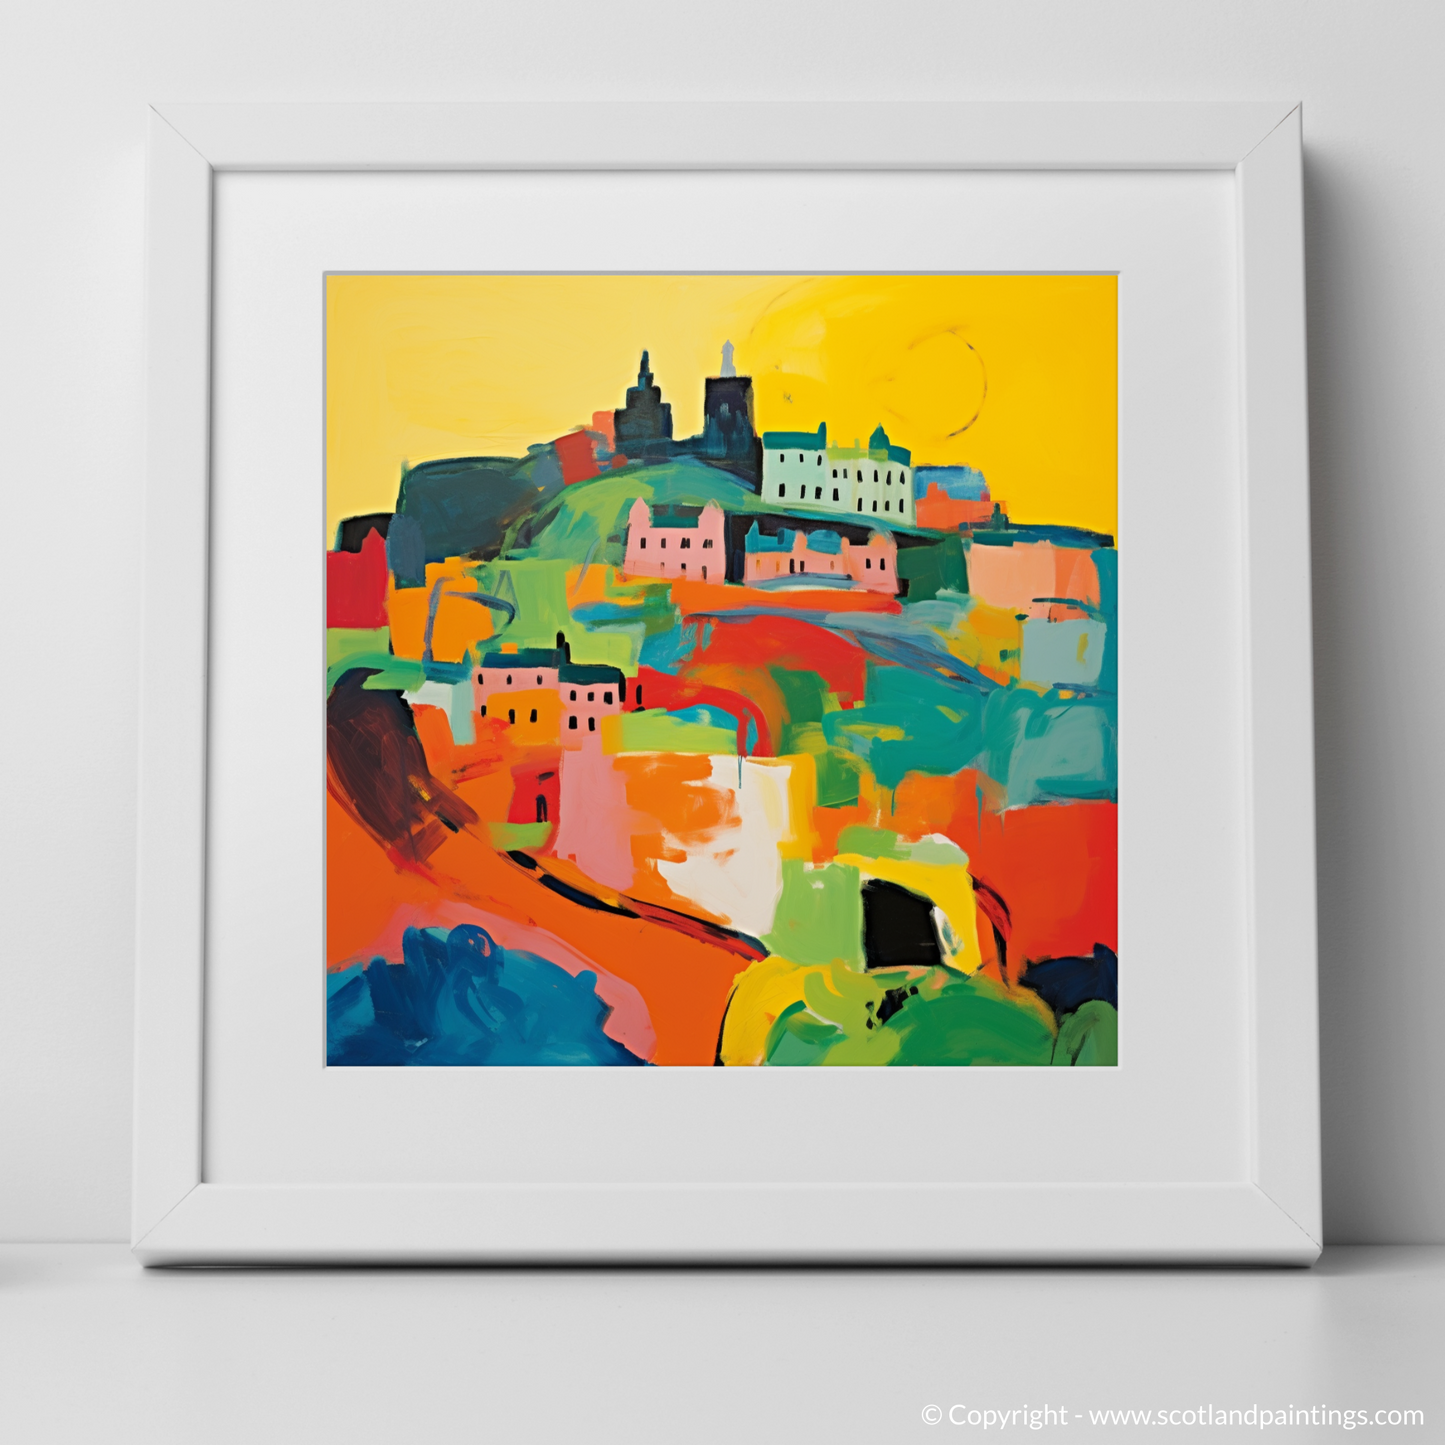 Edinburgh Reimagined: An Abstract Ode to the City's Spirit